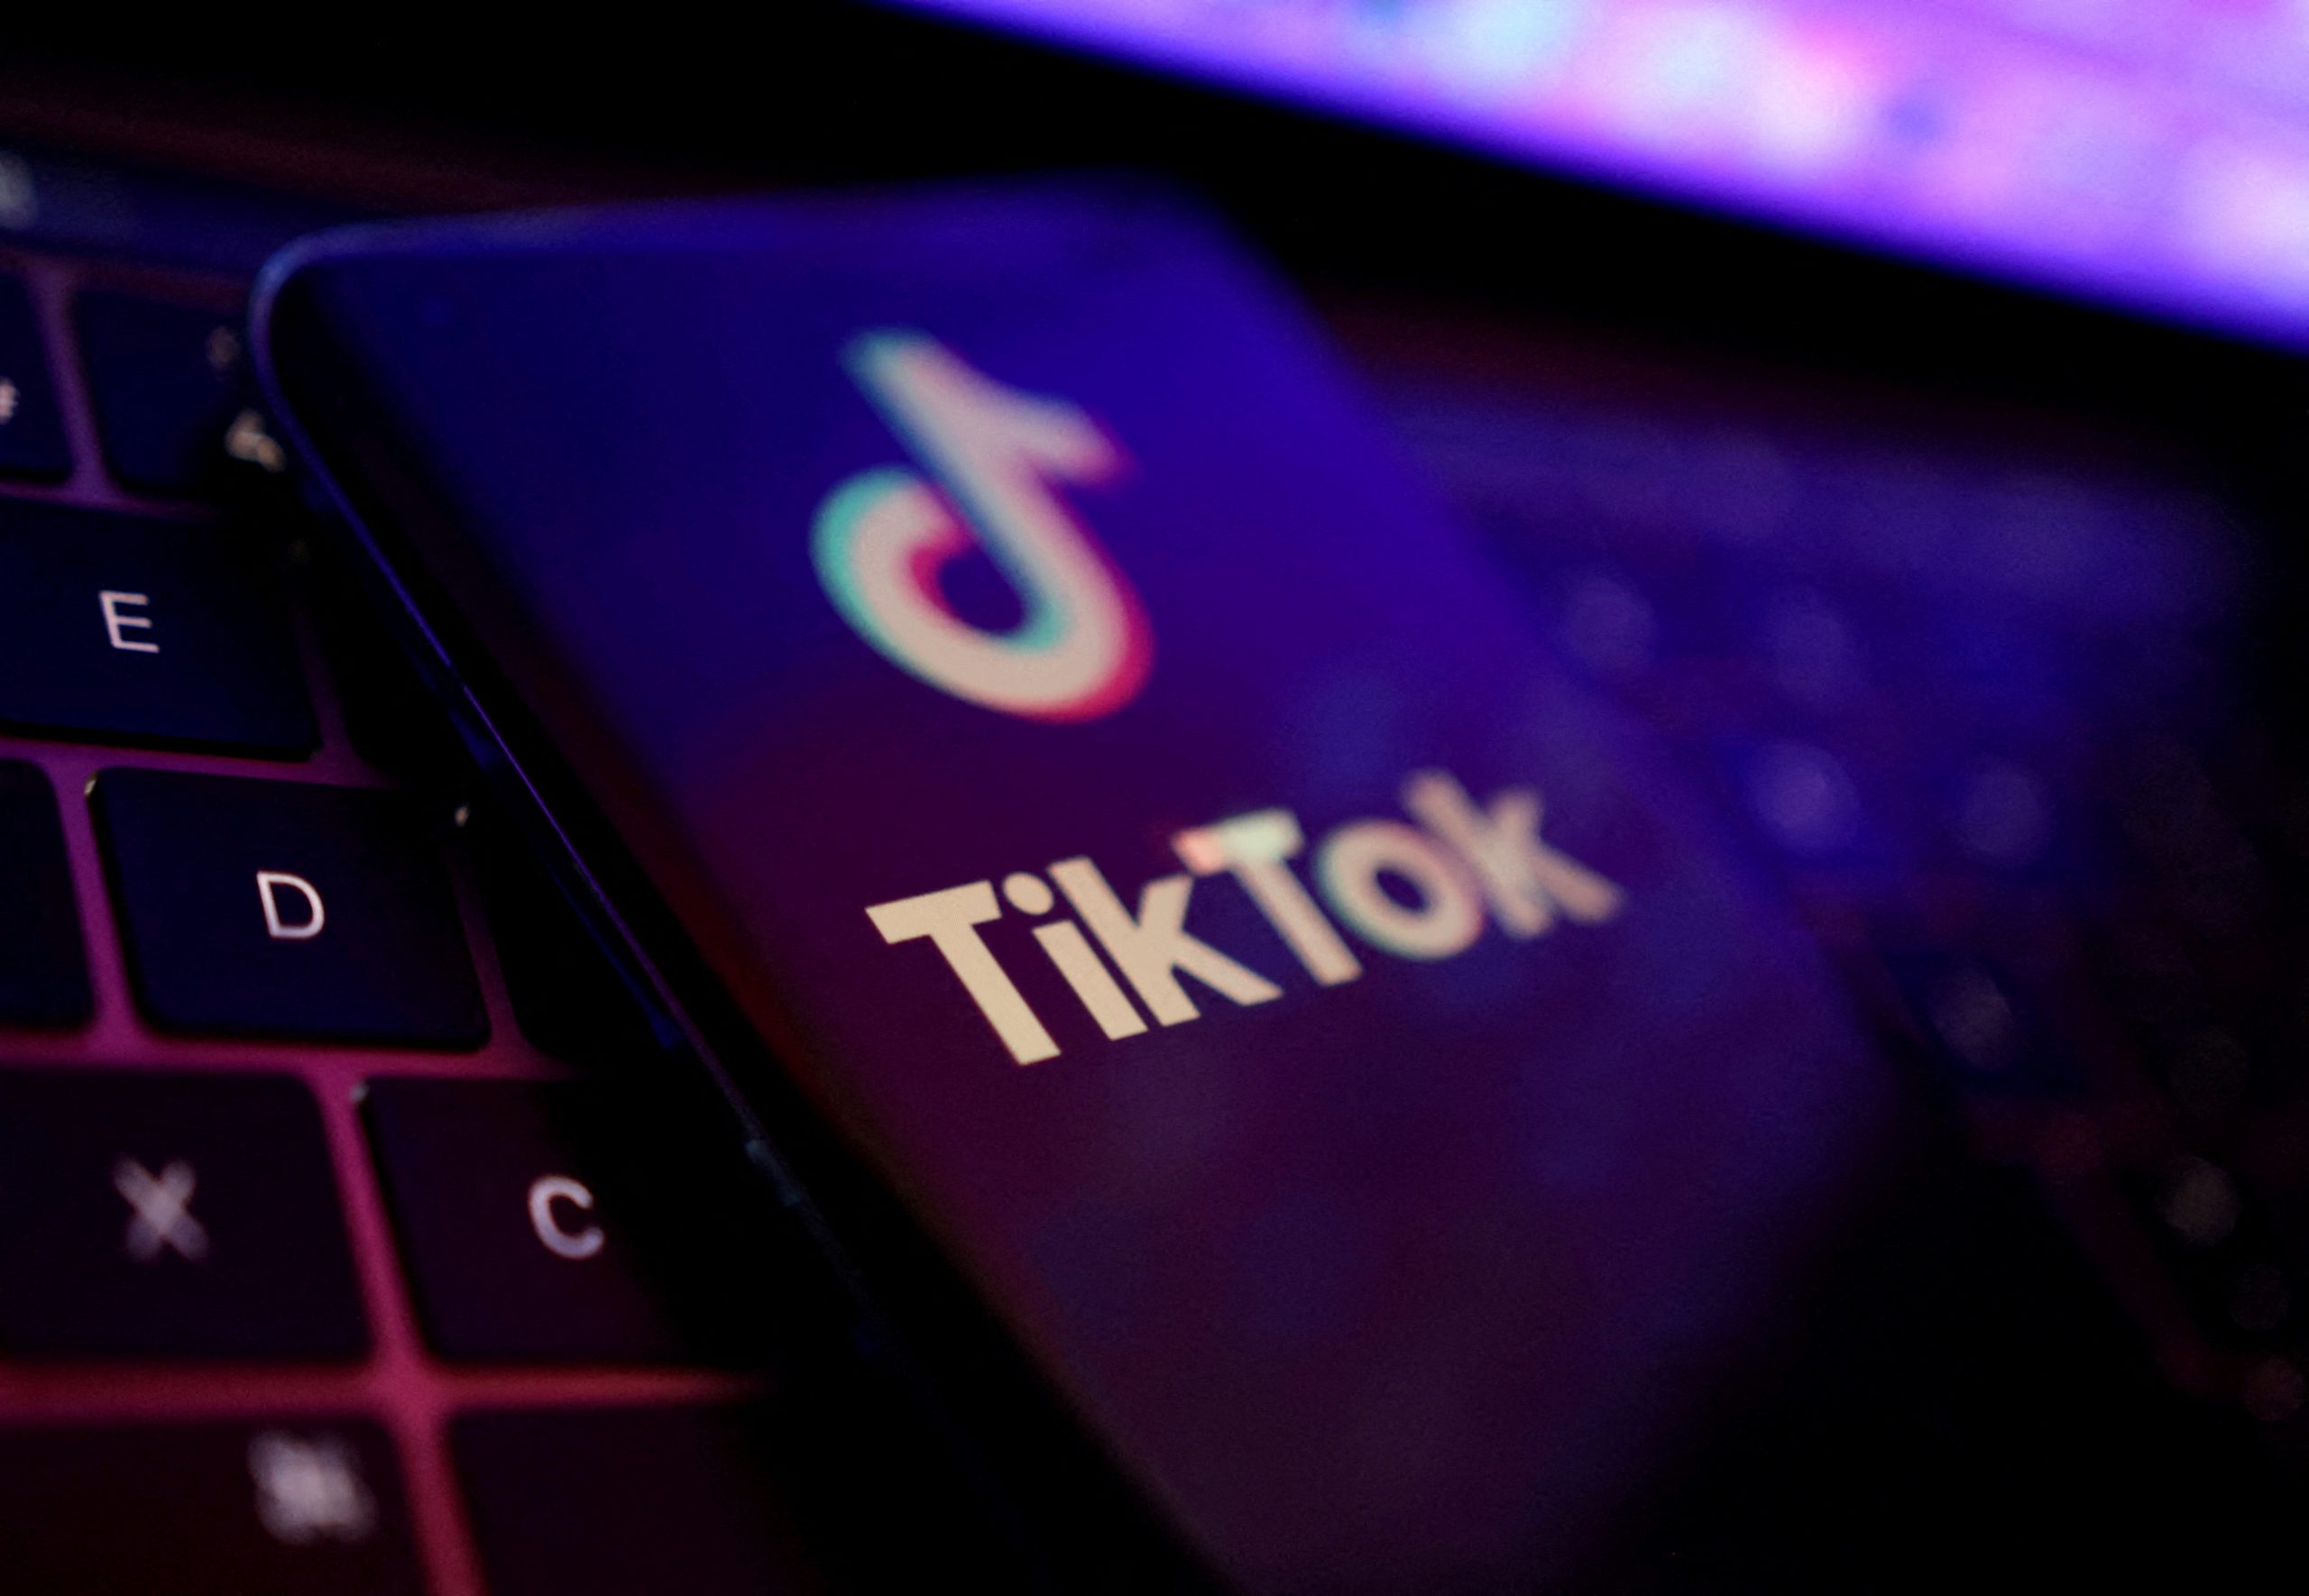 FBI Director Wray: China Could Use TikTok to 'Control Software on Millions' of Americans' Devices - Washington Free Beacon